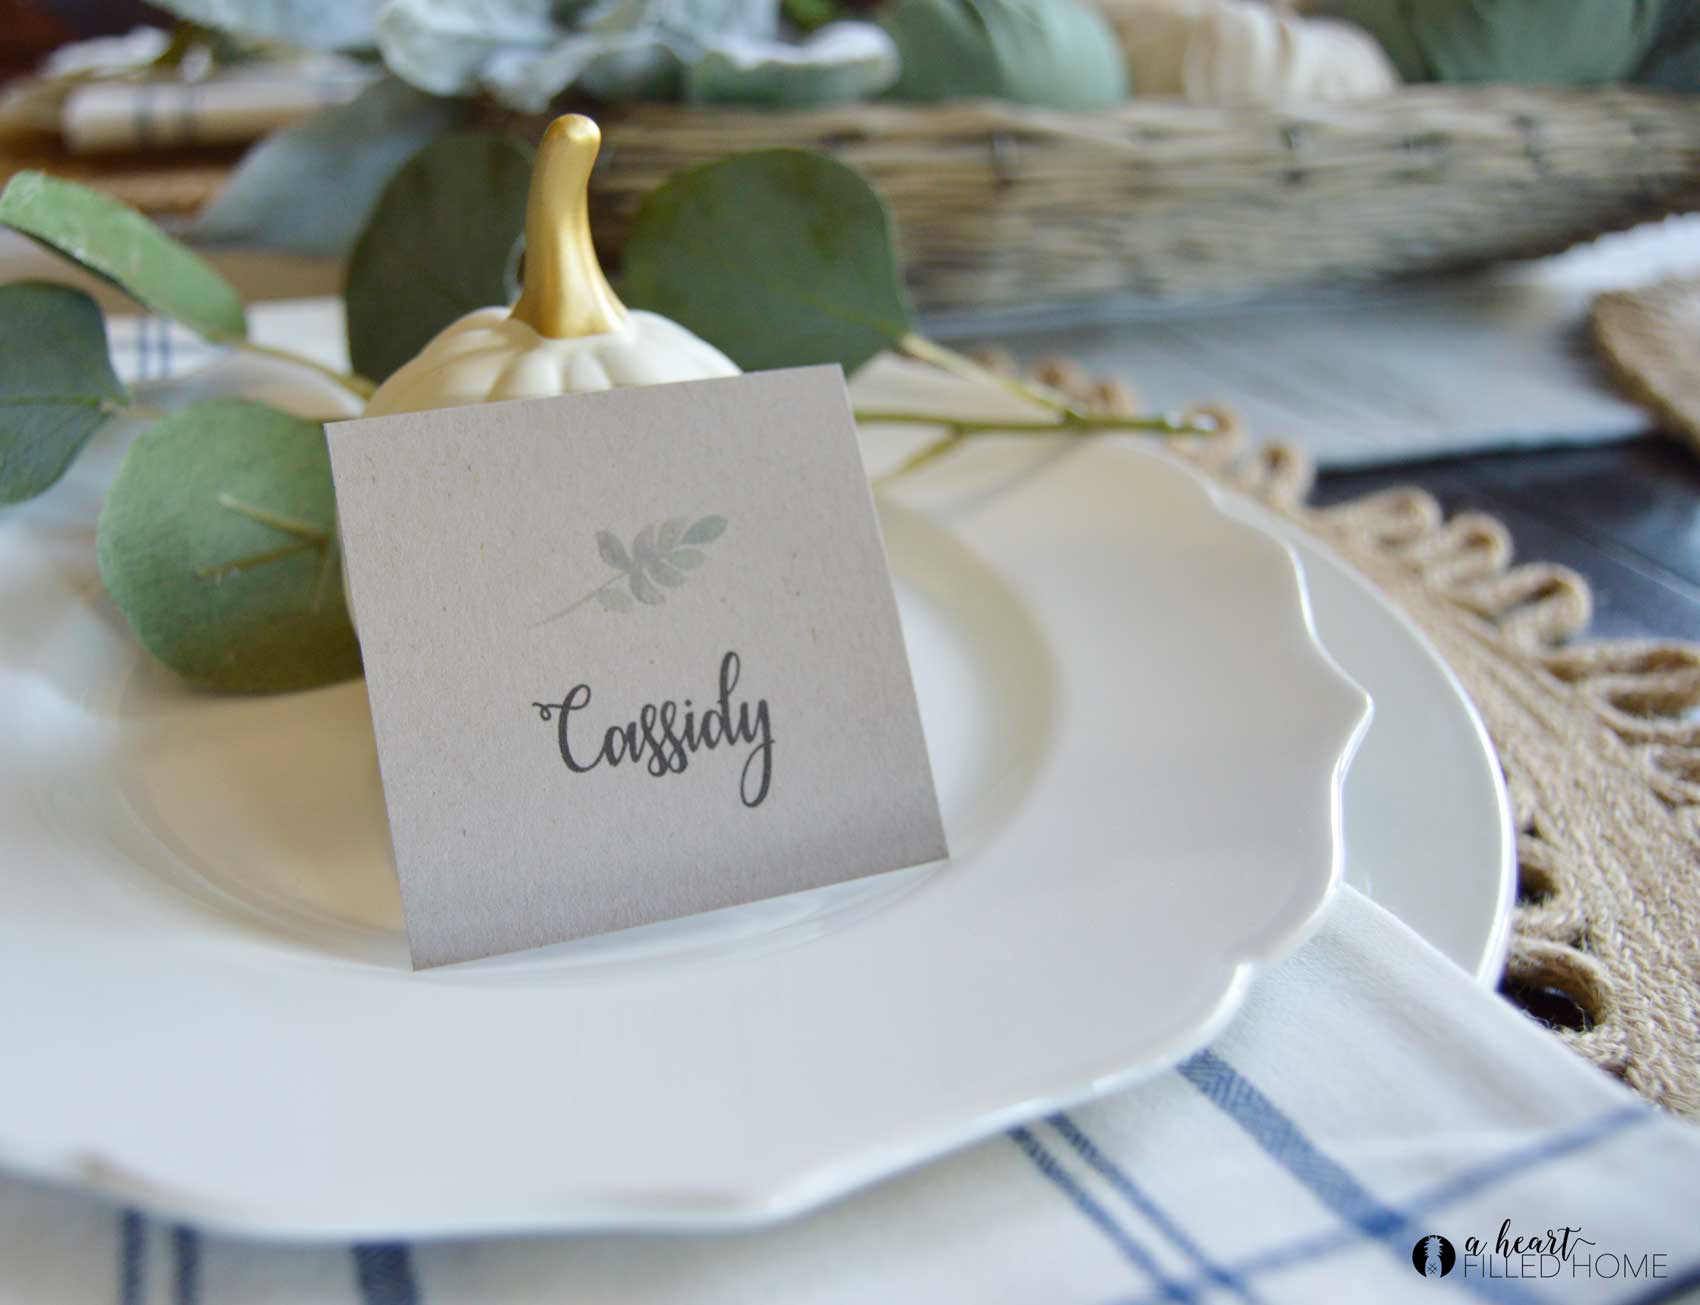 Printable Place Cards The Harper House